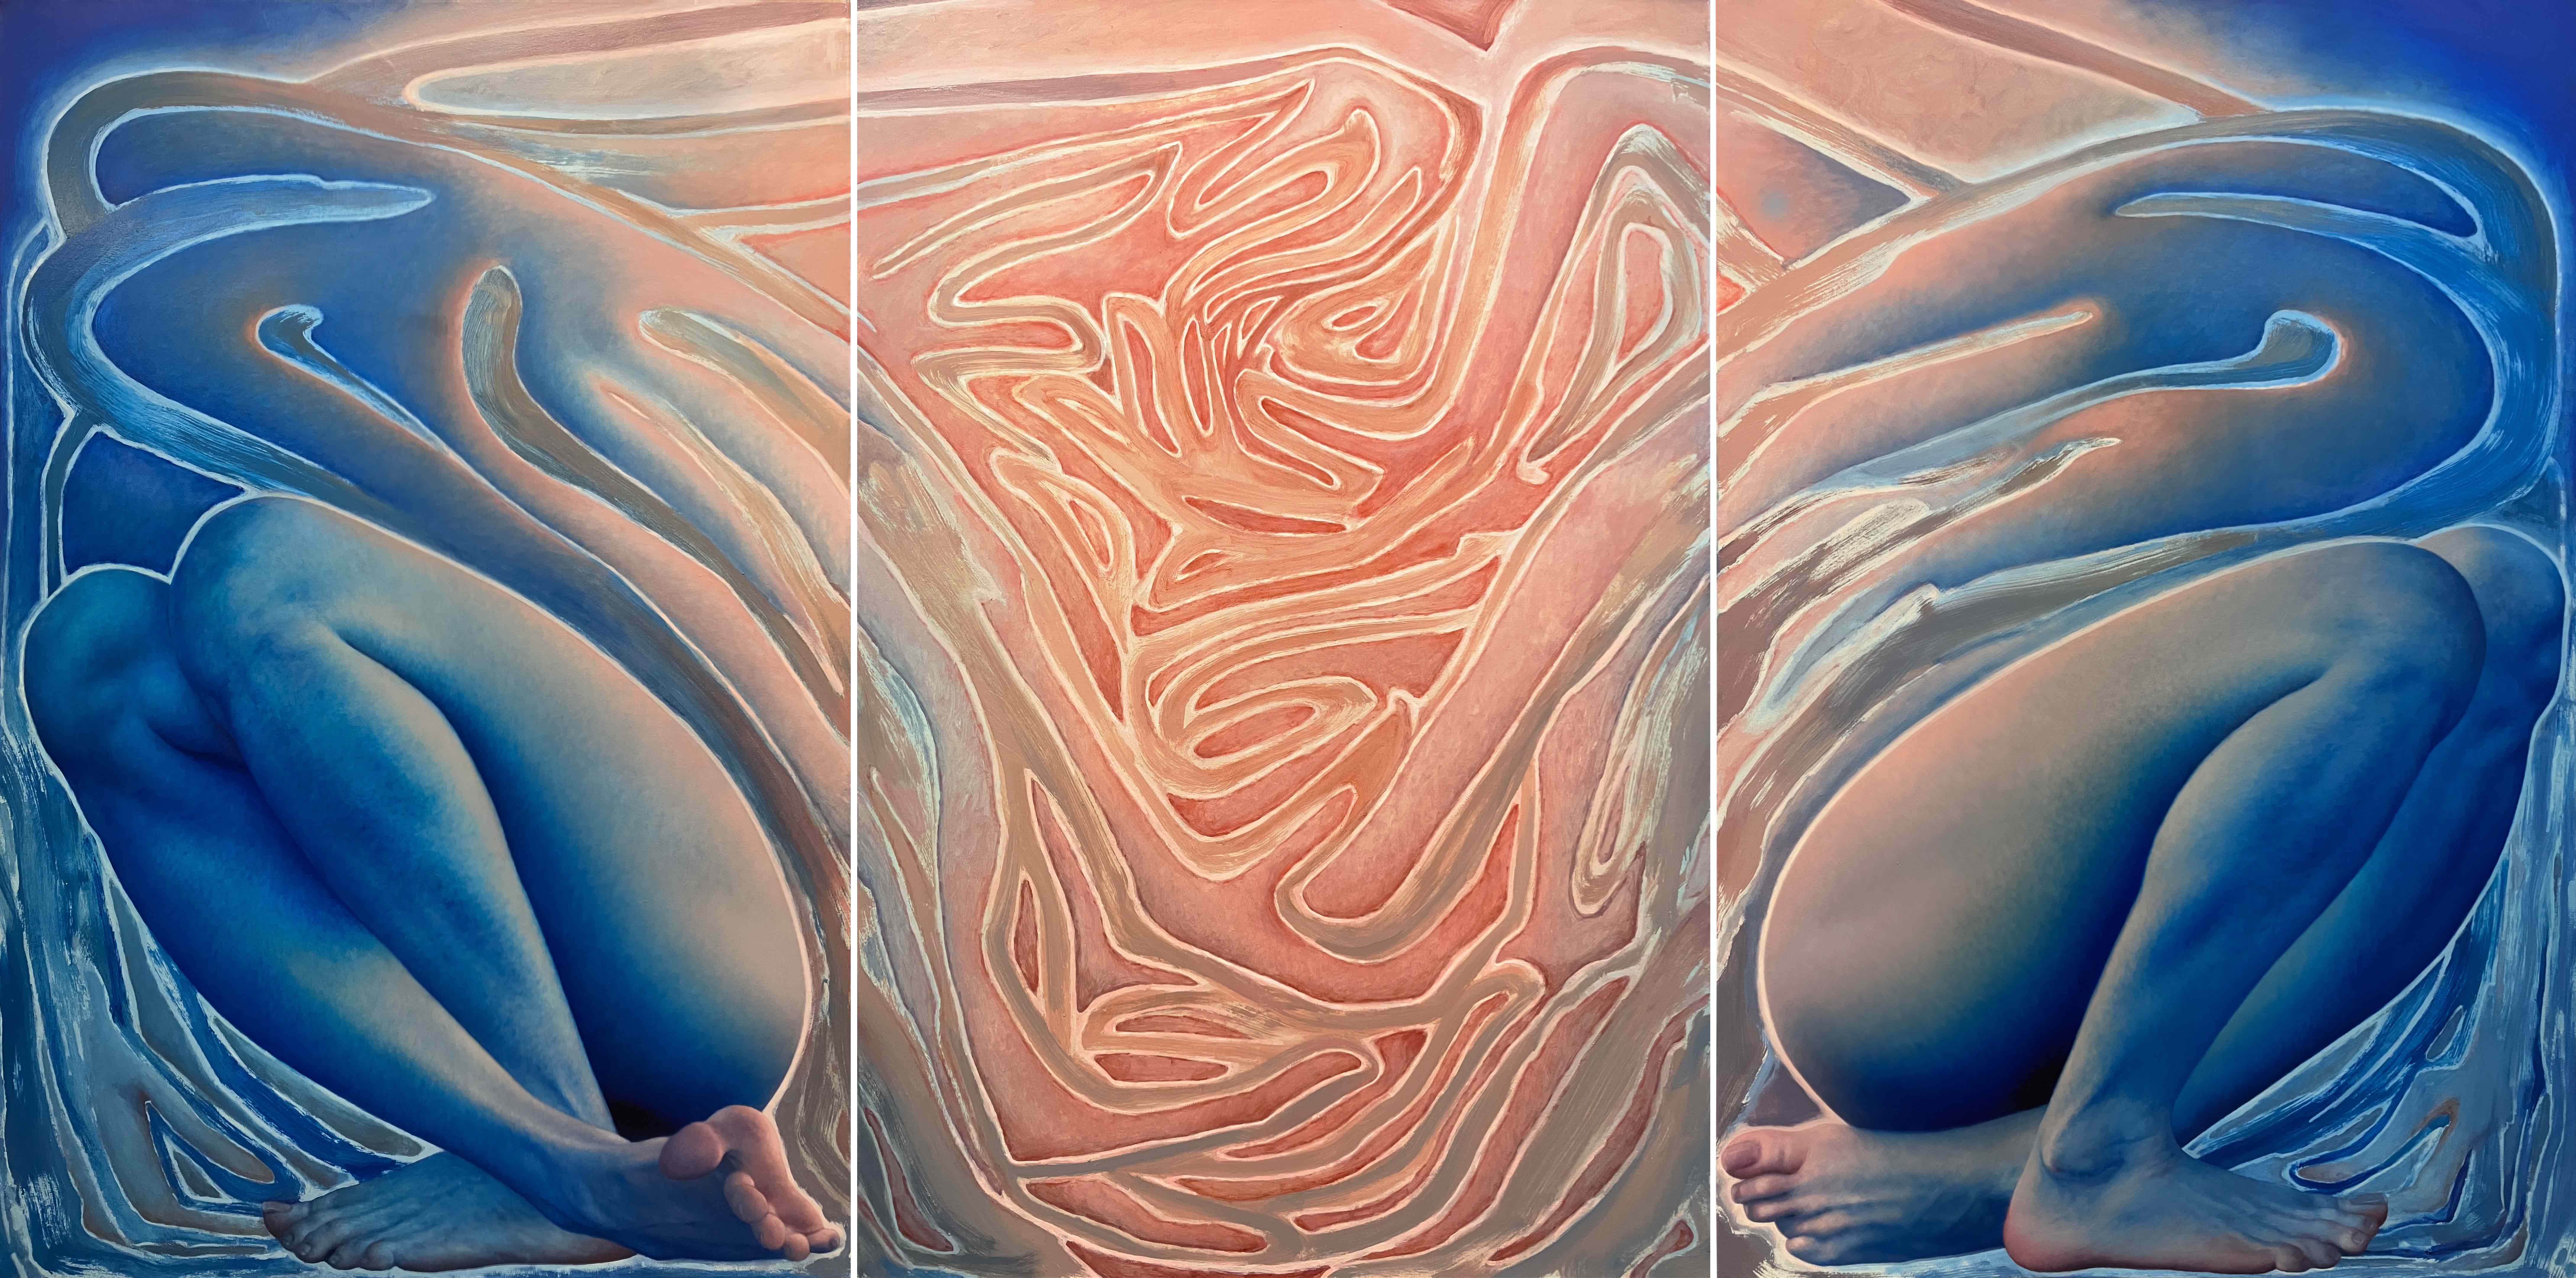 Aleah Chapin, The Space Between Our Separateness, 2022. Oil on canvas, 60" x 120" (triptych).